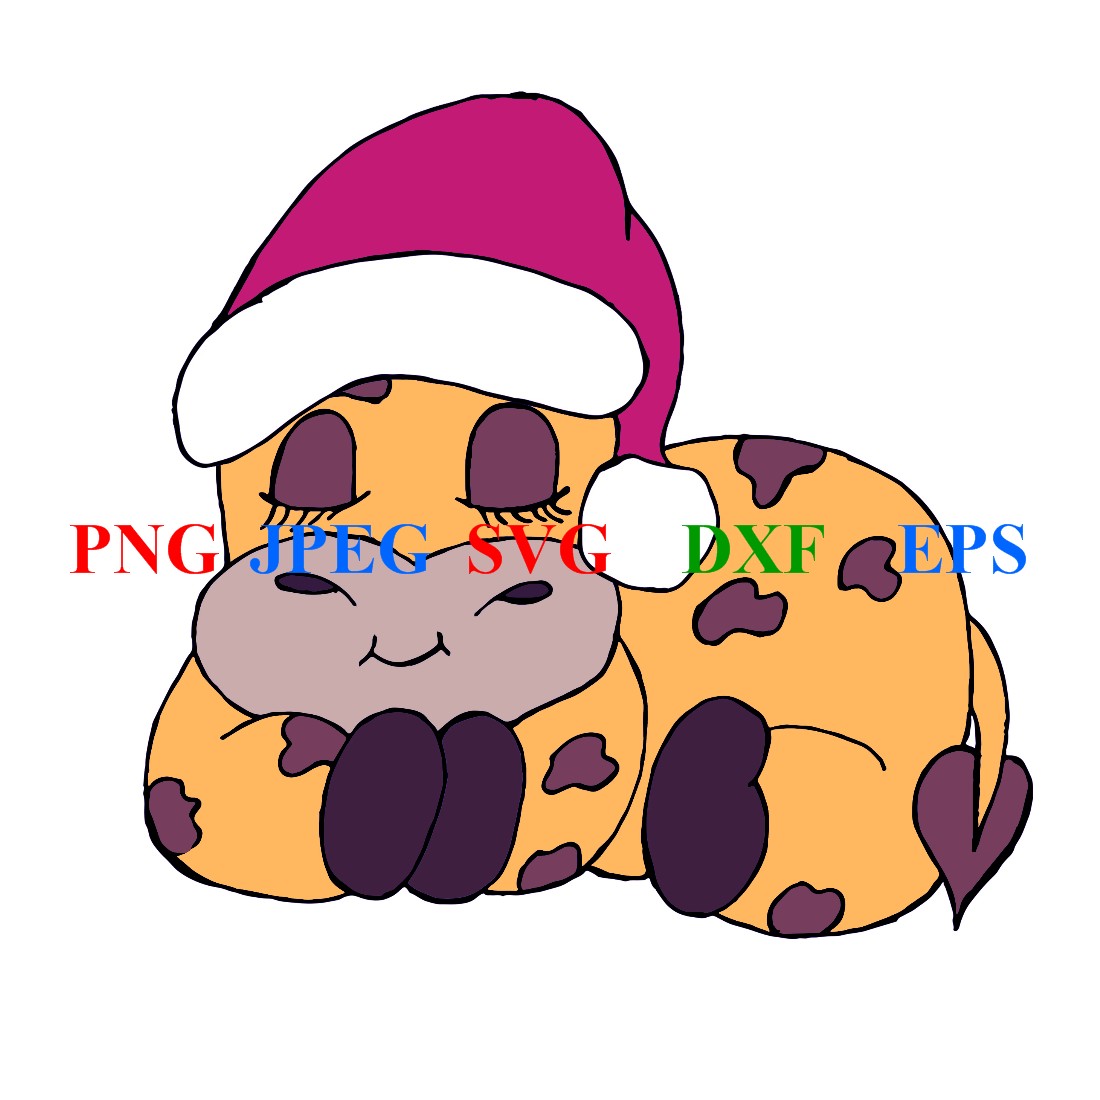 Adorable picture with a sleeping giraffe wearing a Santa hat.